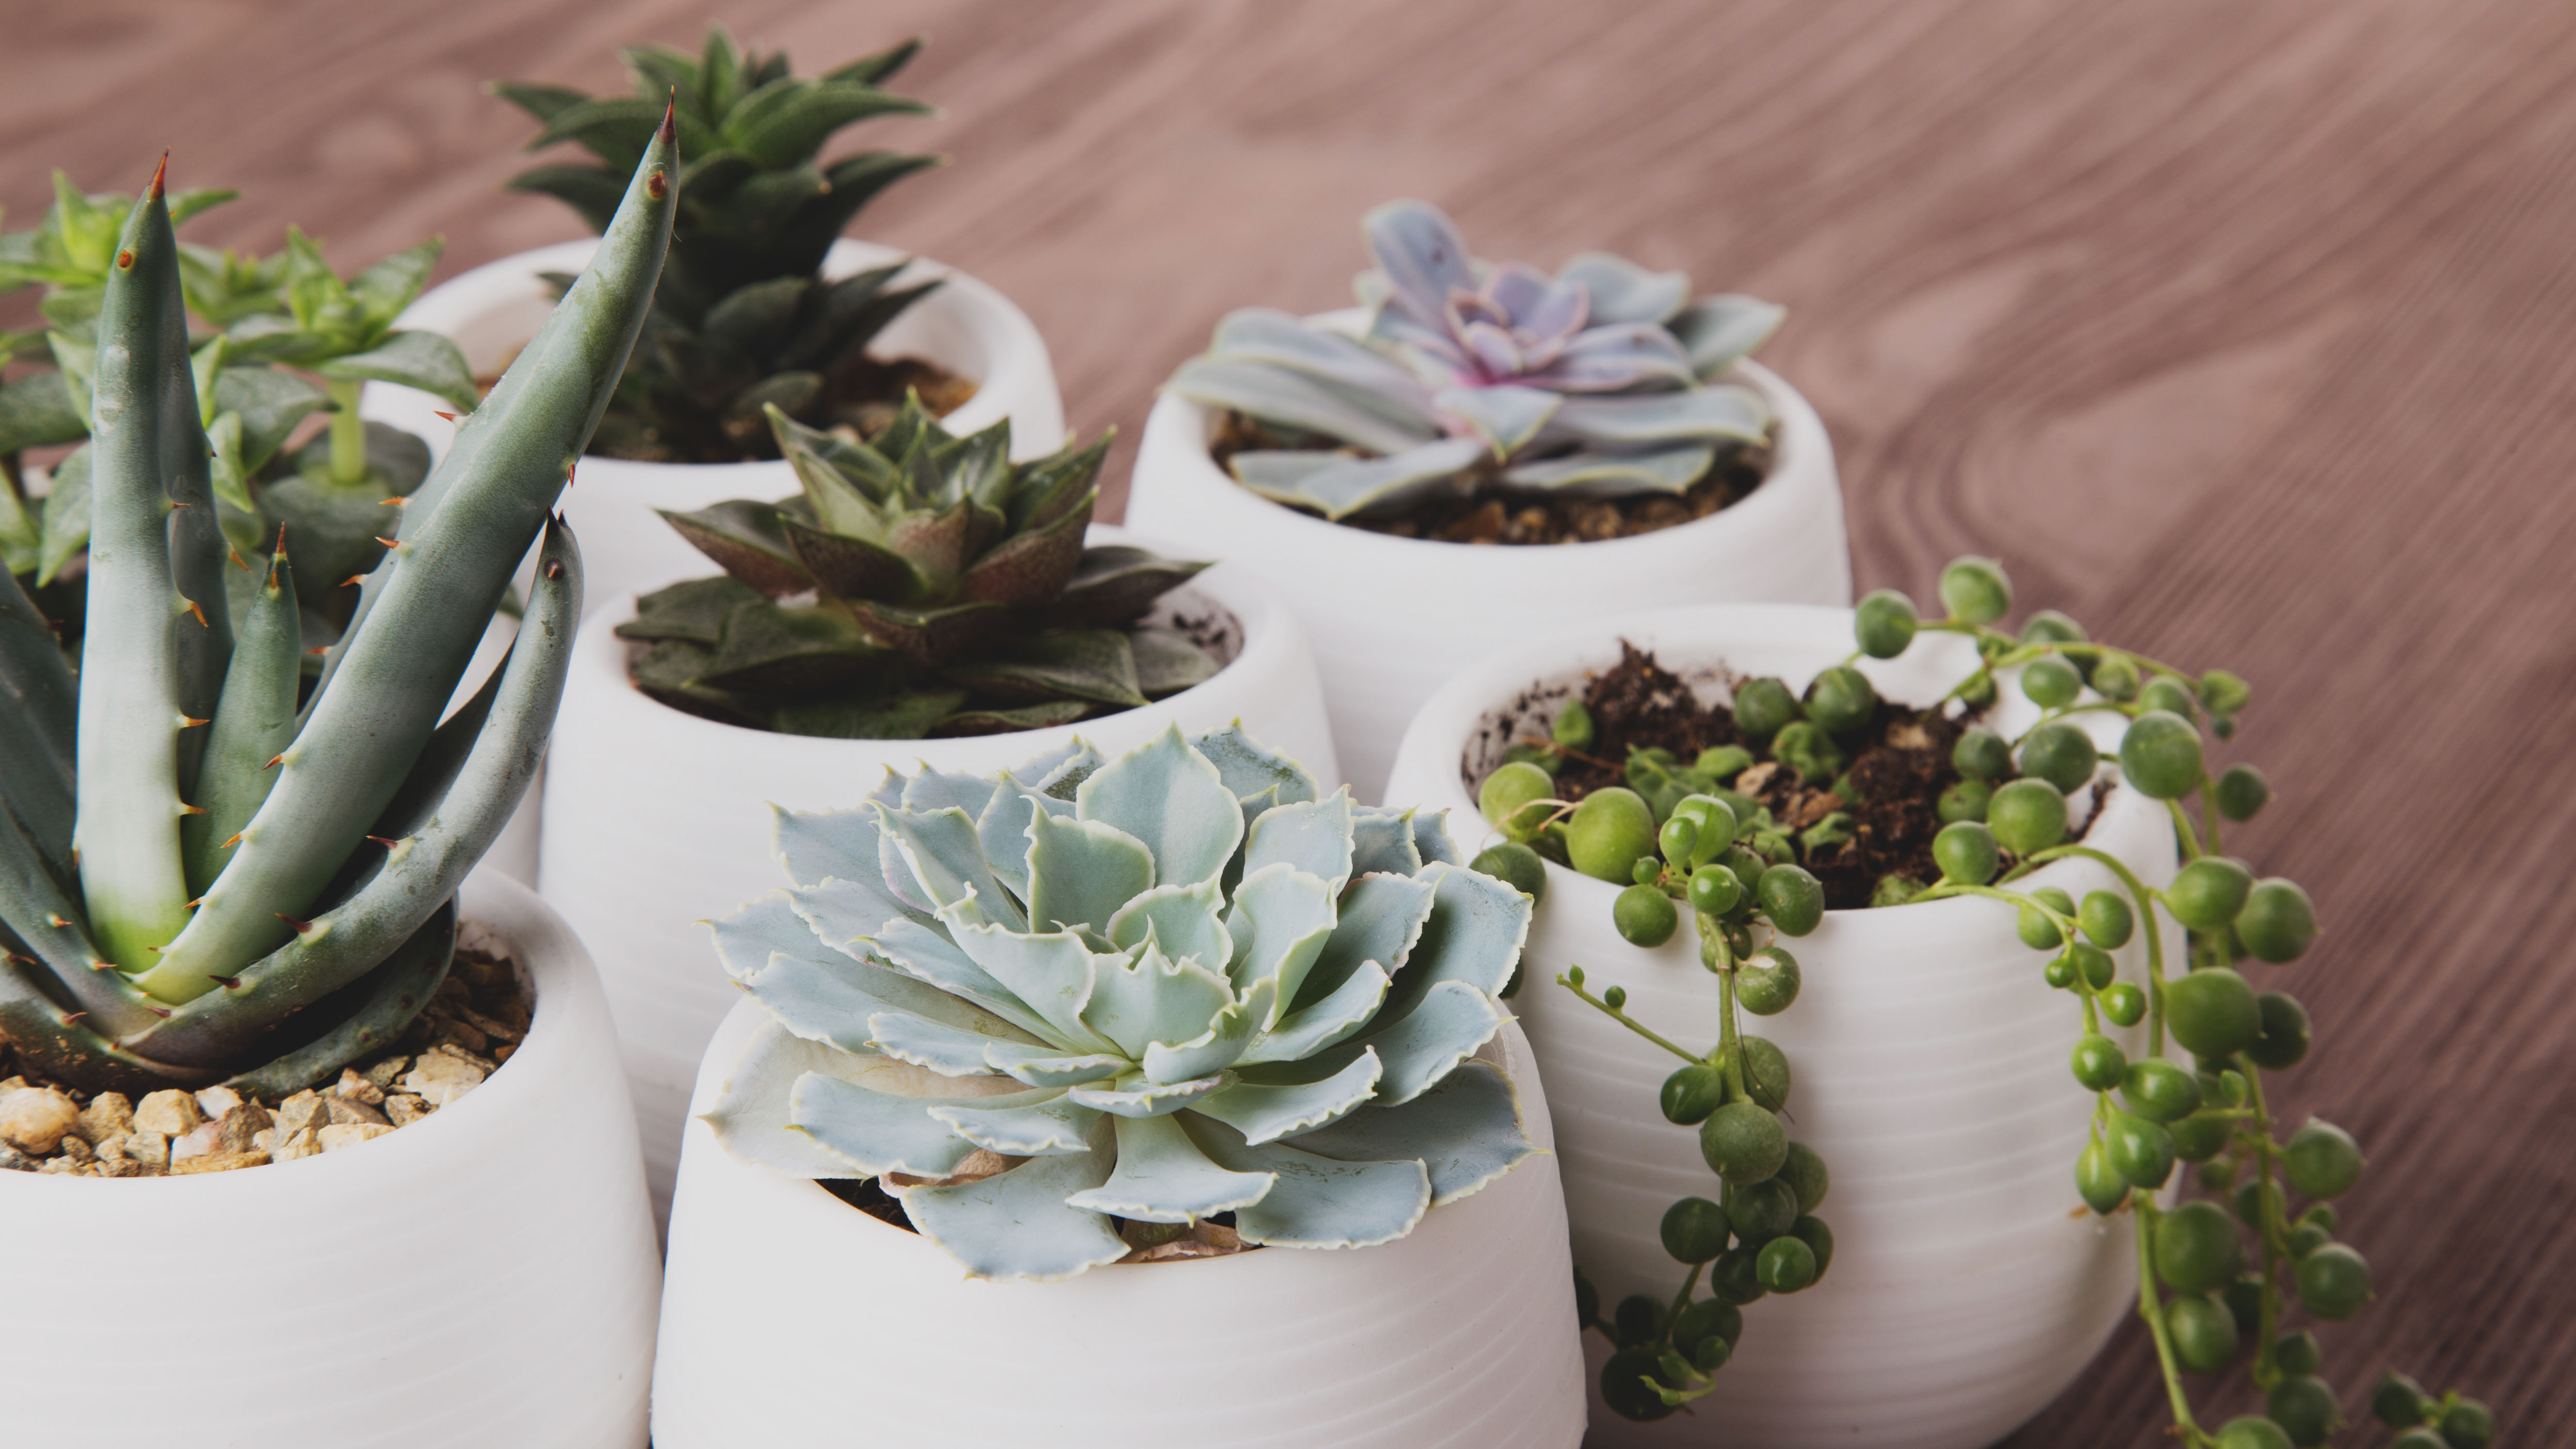 This one hack saved my succulent — and it takes seconds